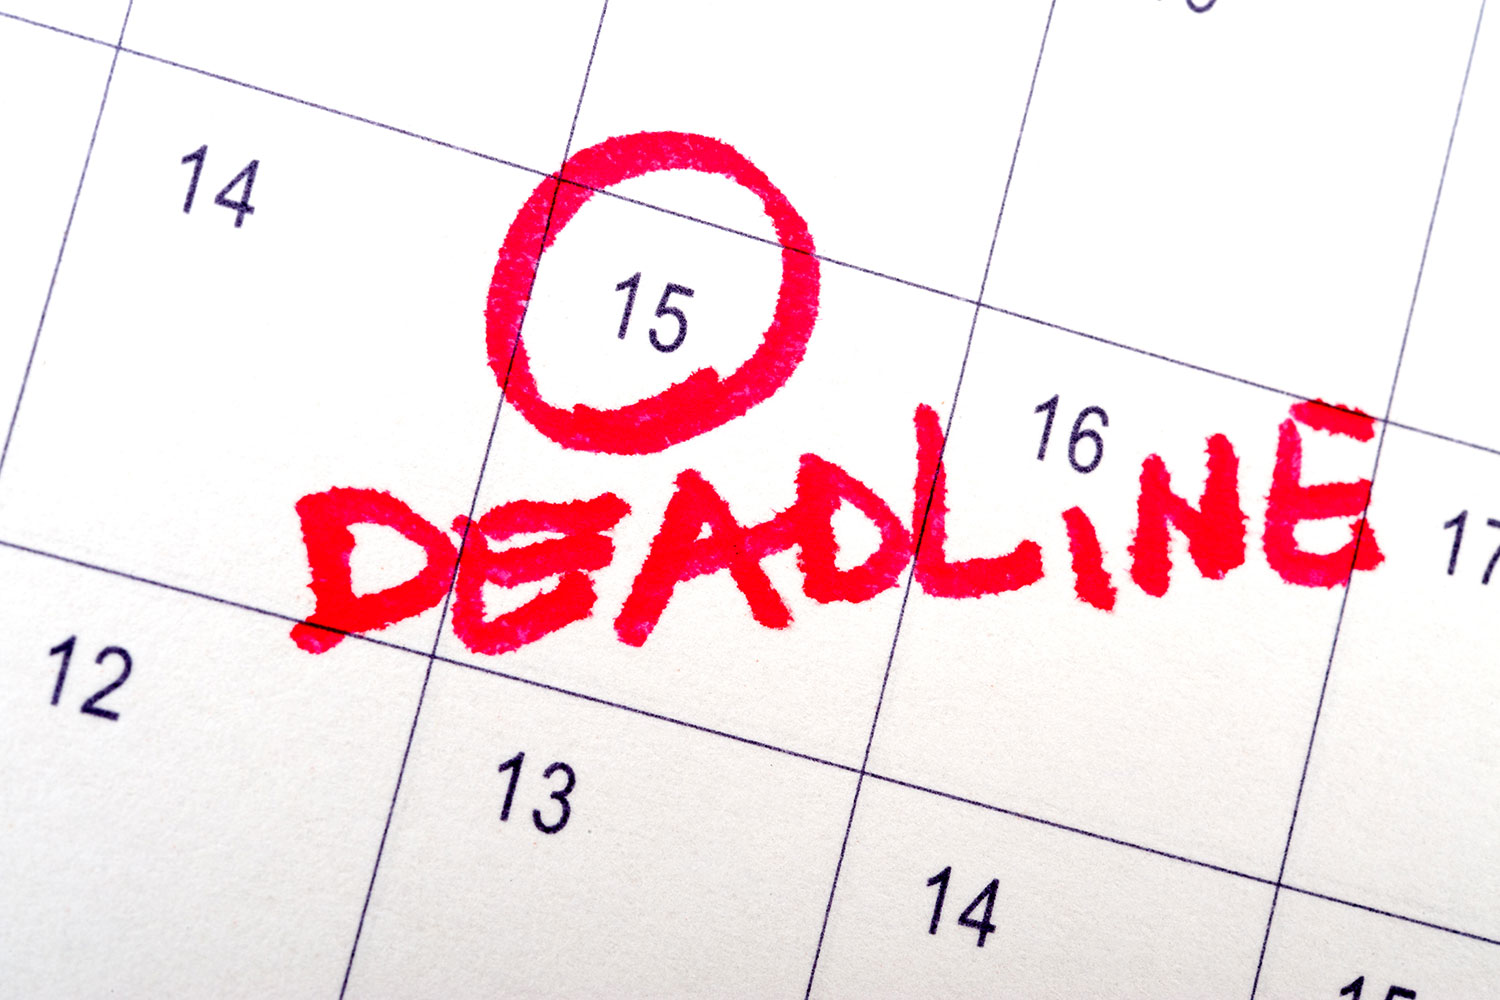 Can I Still Apply For Asylum After The One Year Filing Deadline?